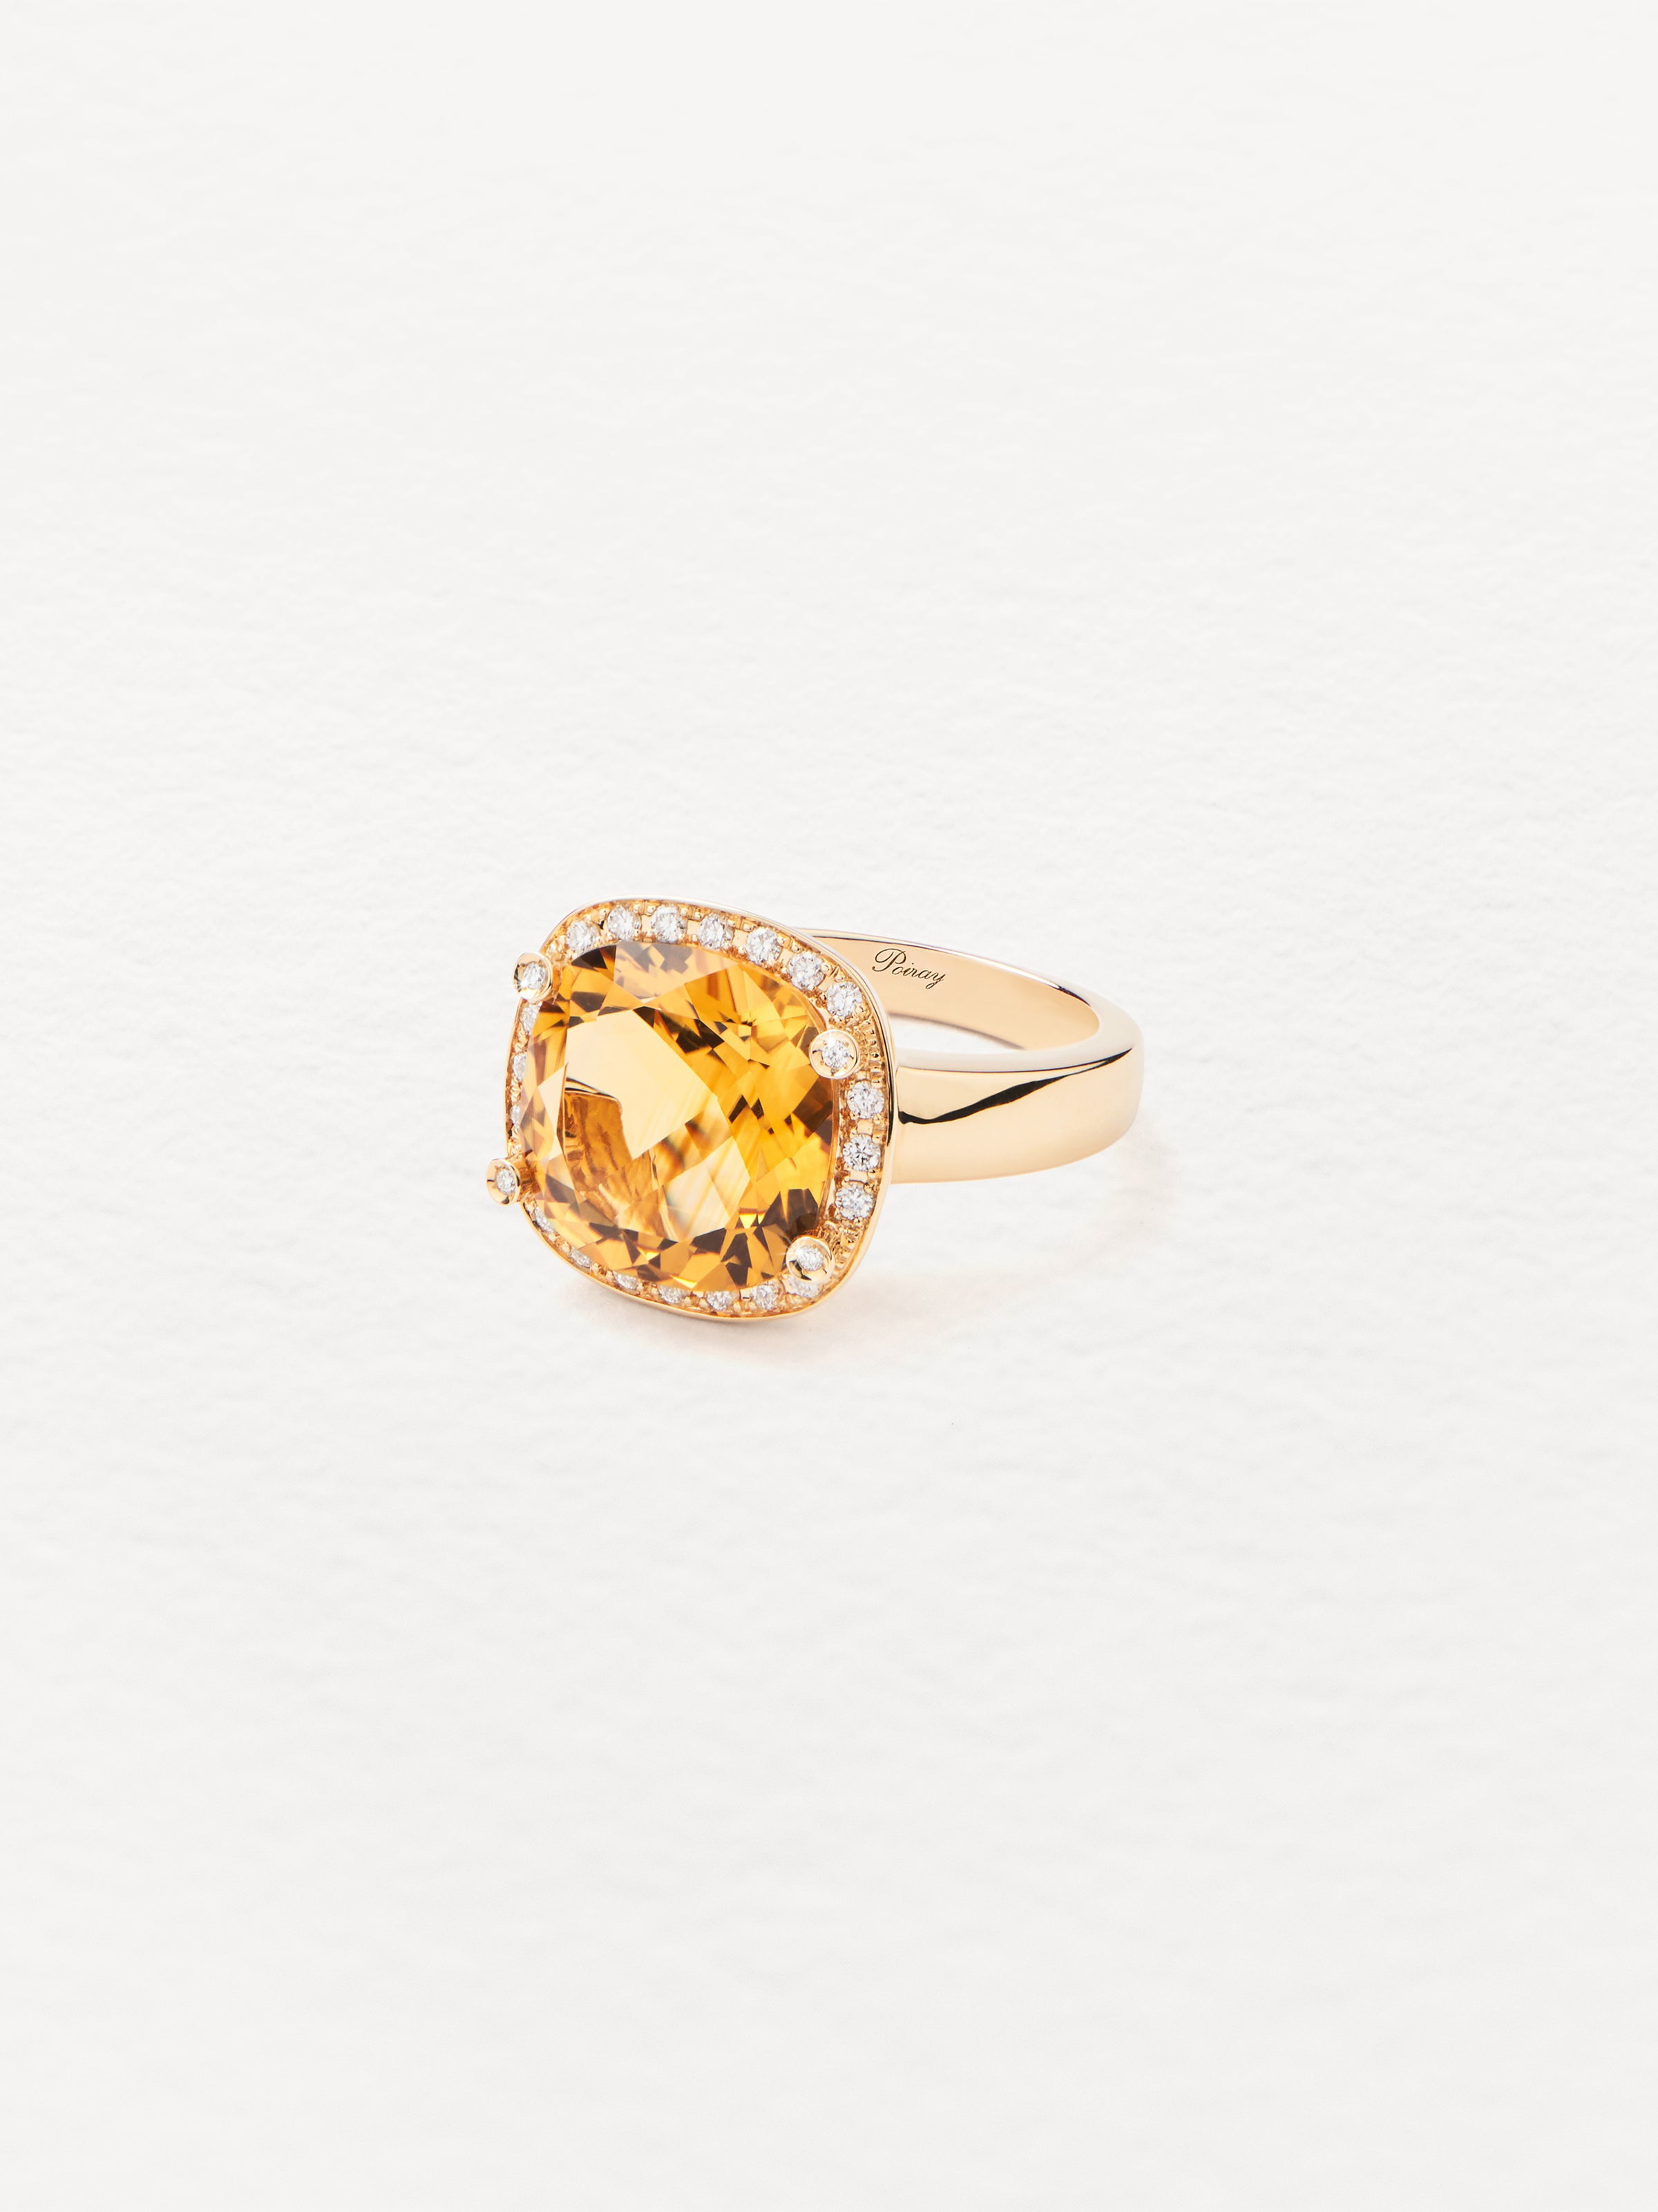 Bague Intuition Or jaune